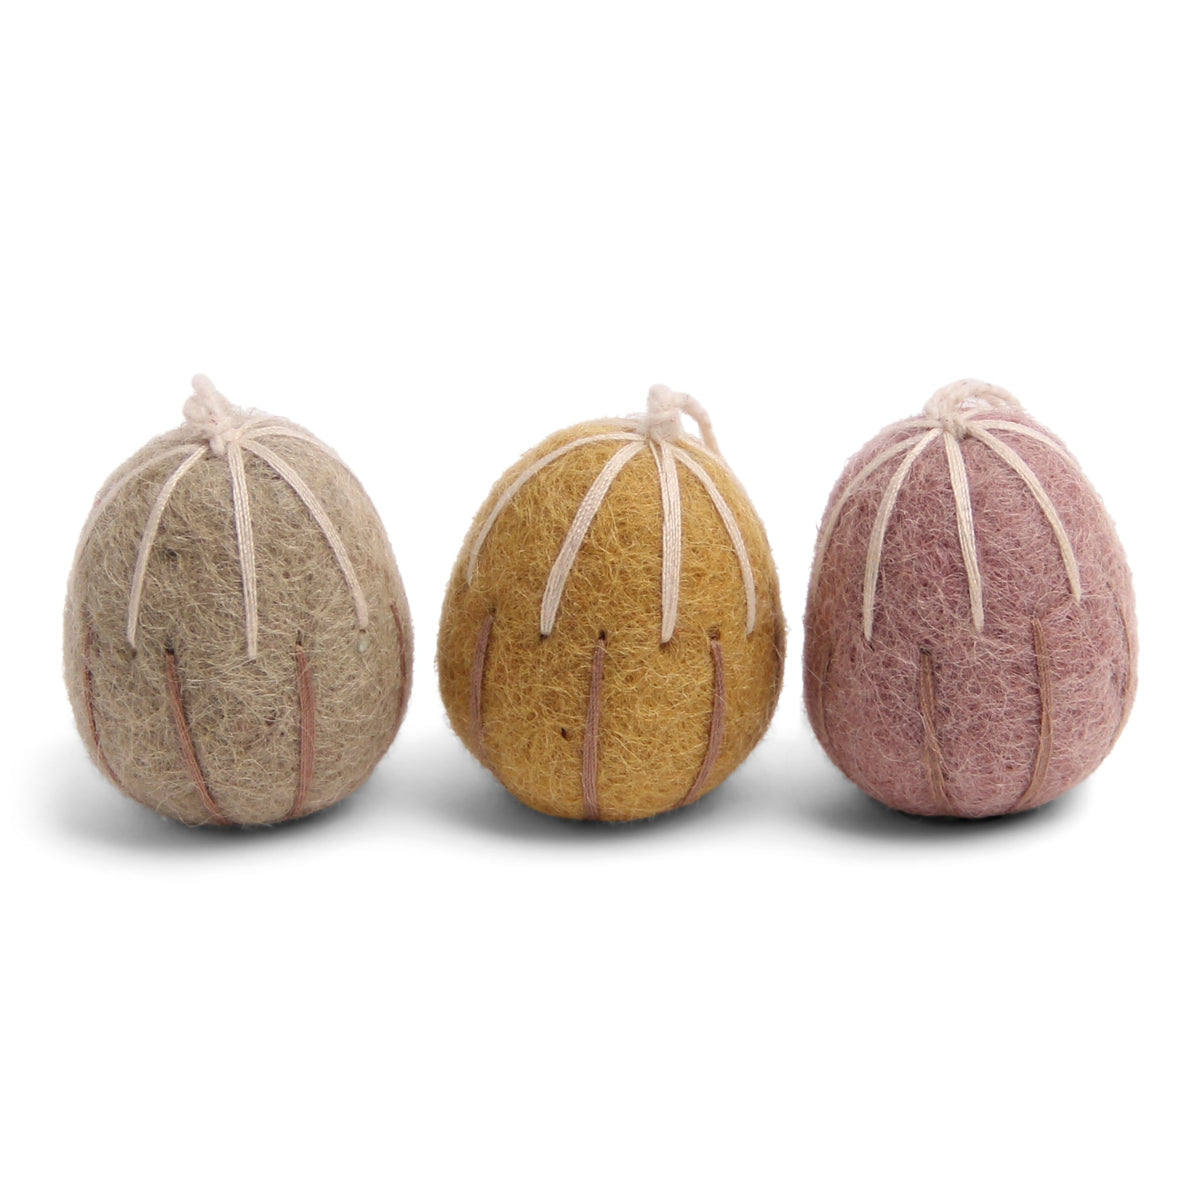 Egg Ornaments with Embroidery (Set of 3) by Én Gry & Sif - Maude Kids Decor